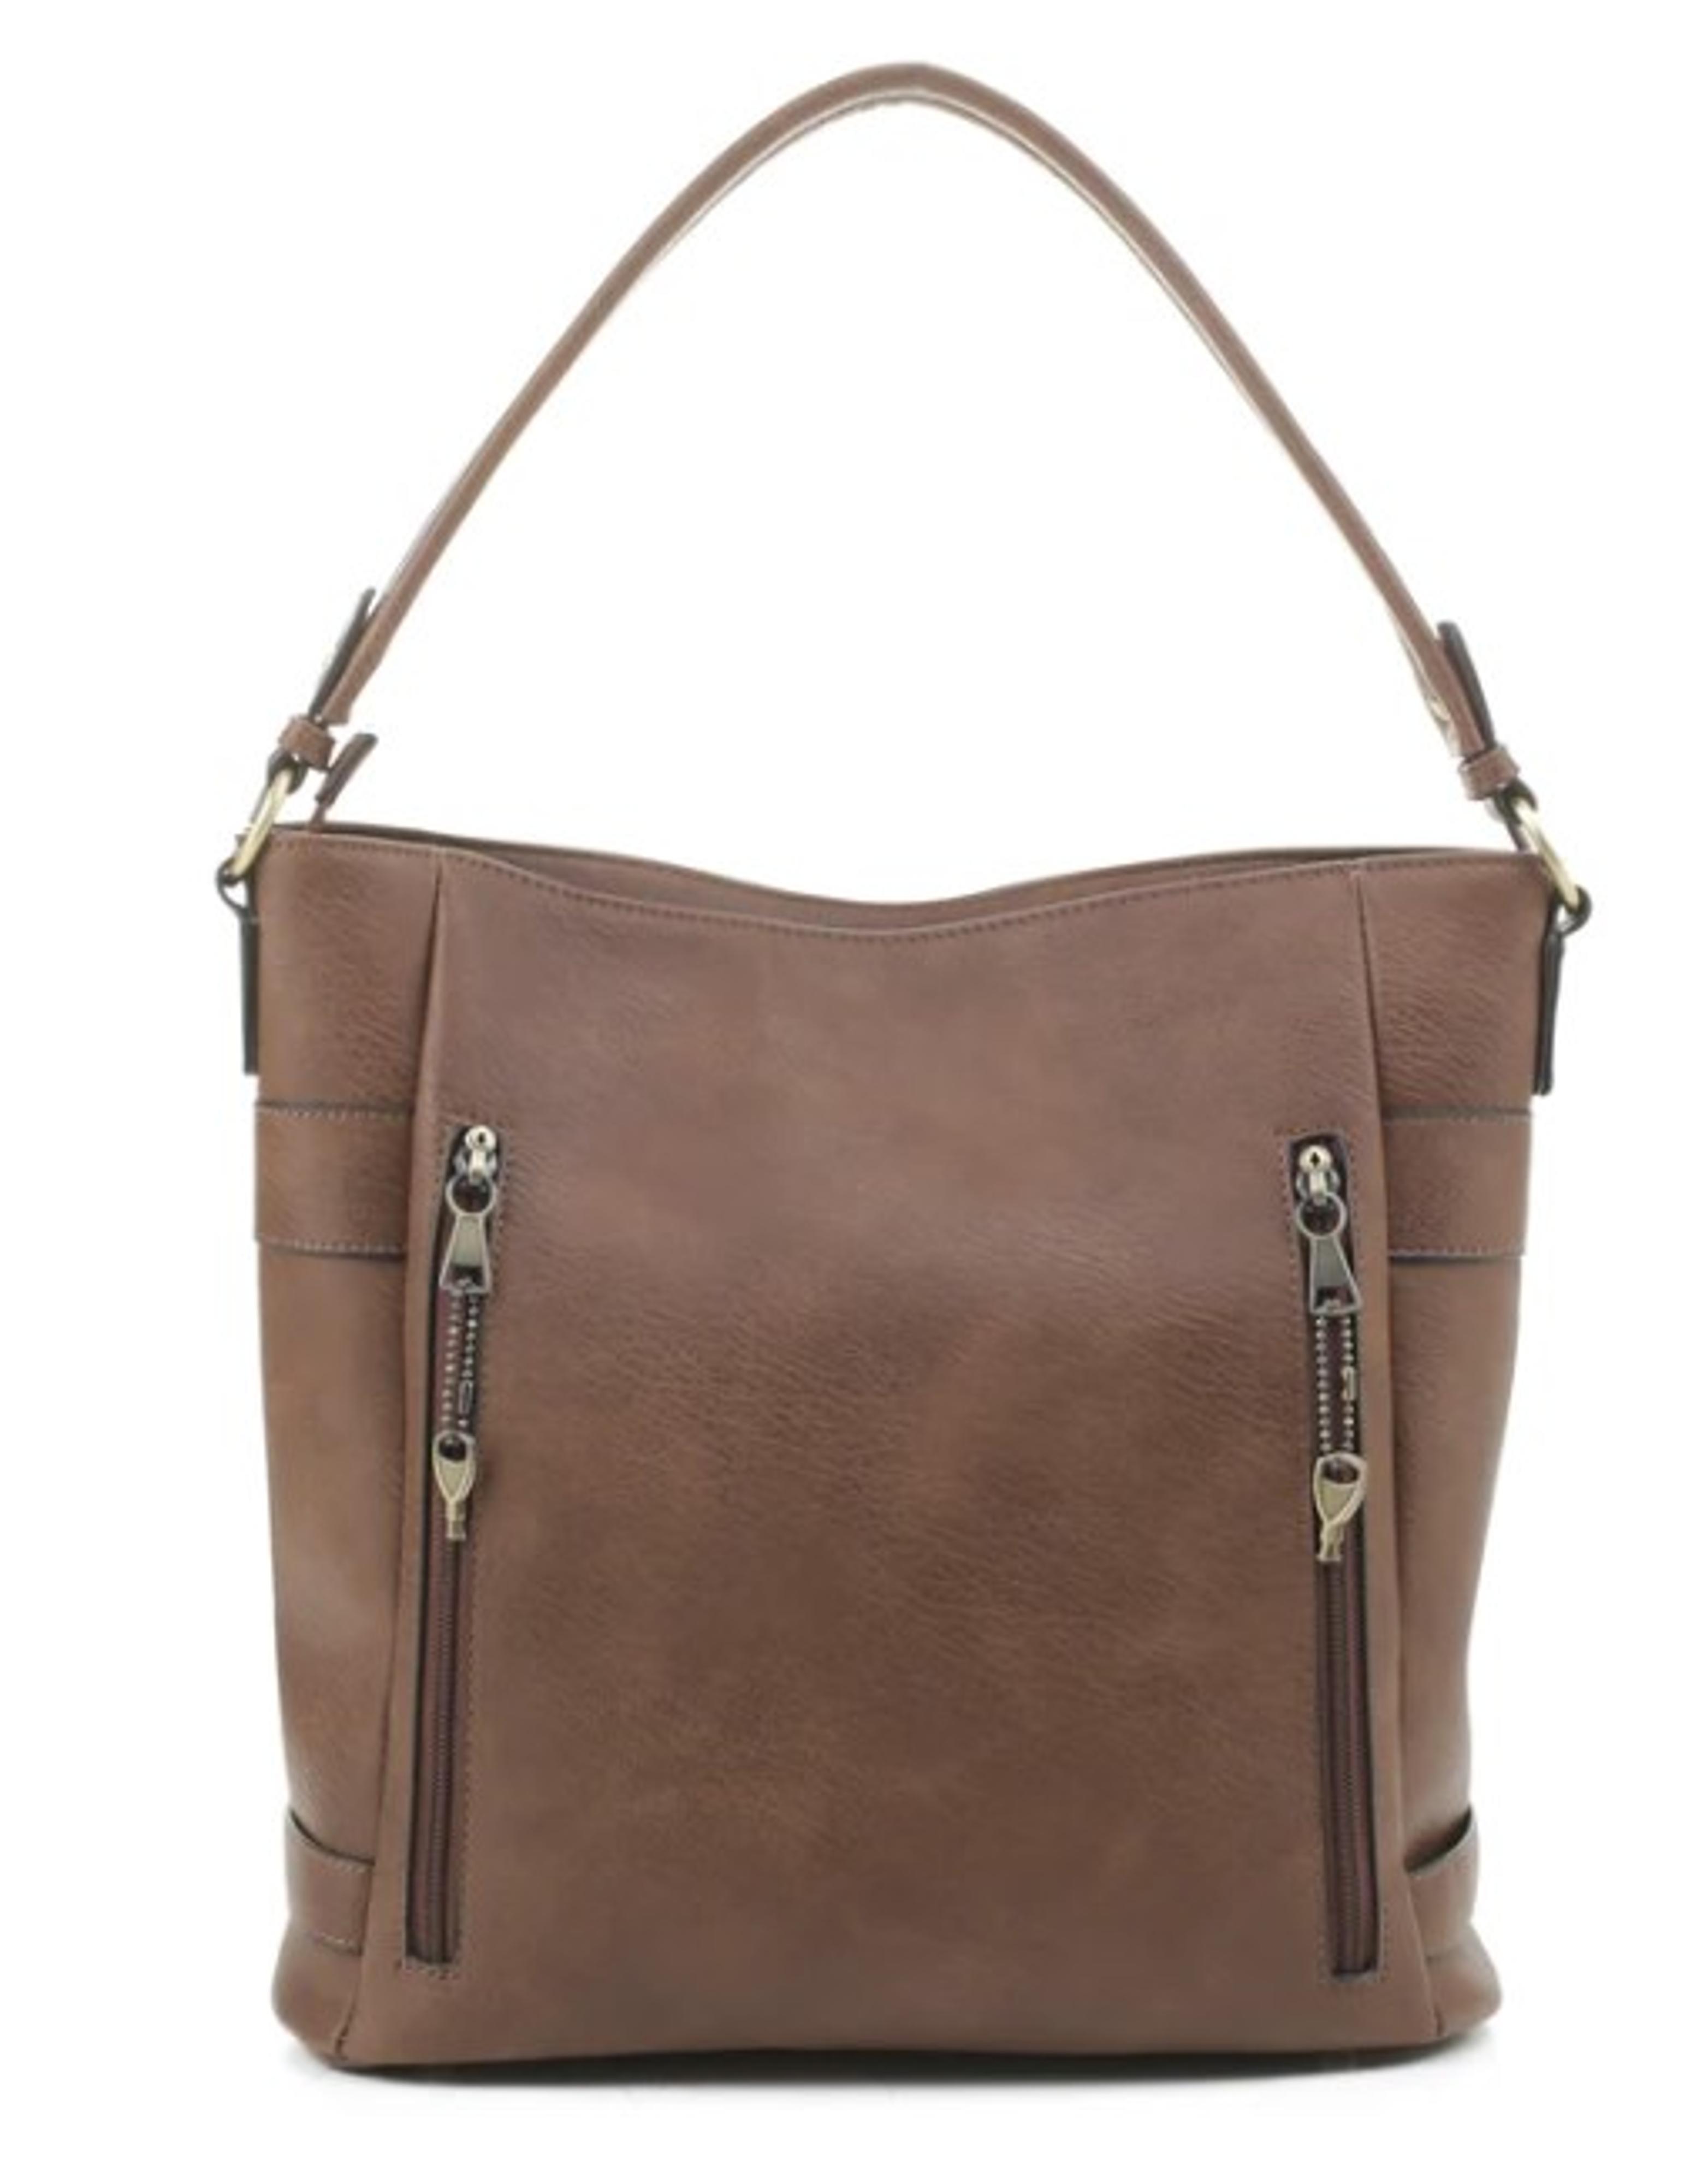  Selina Concealed Carry Hobo